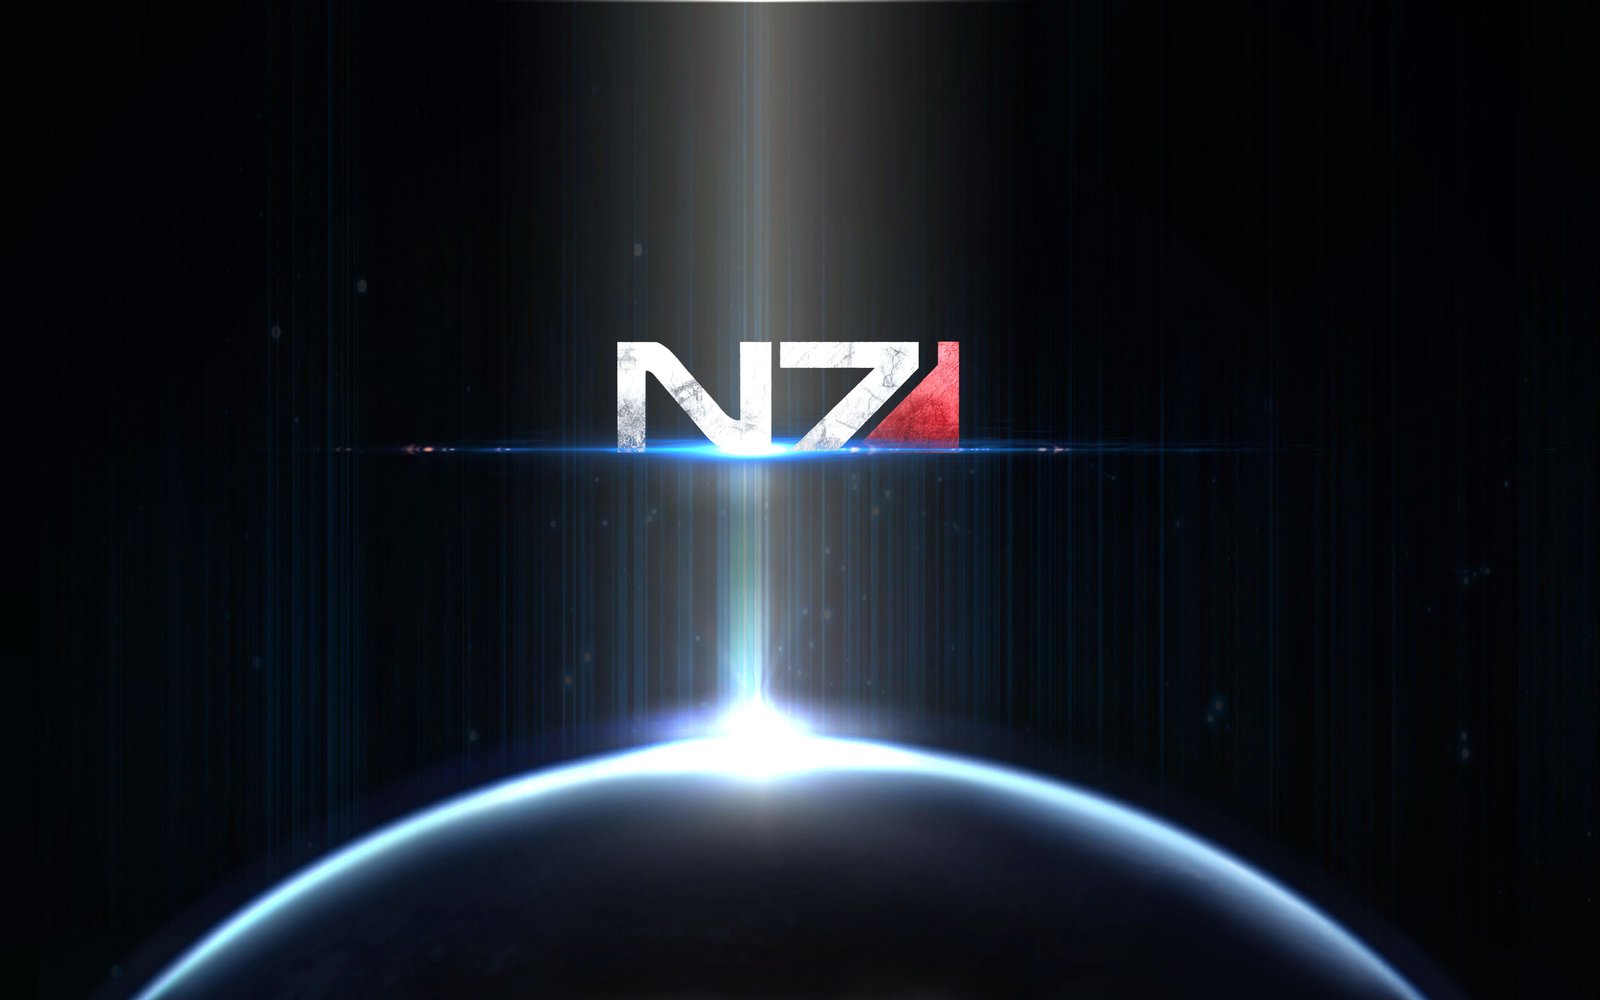 N7 Sign Wallpaper Happy Day By Euderion